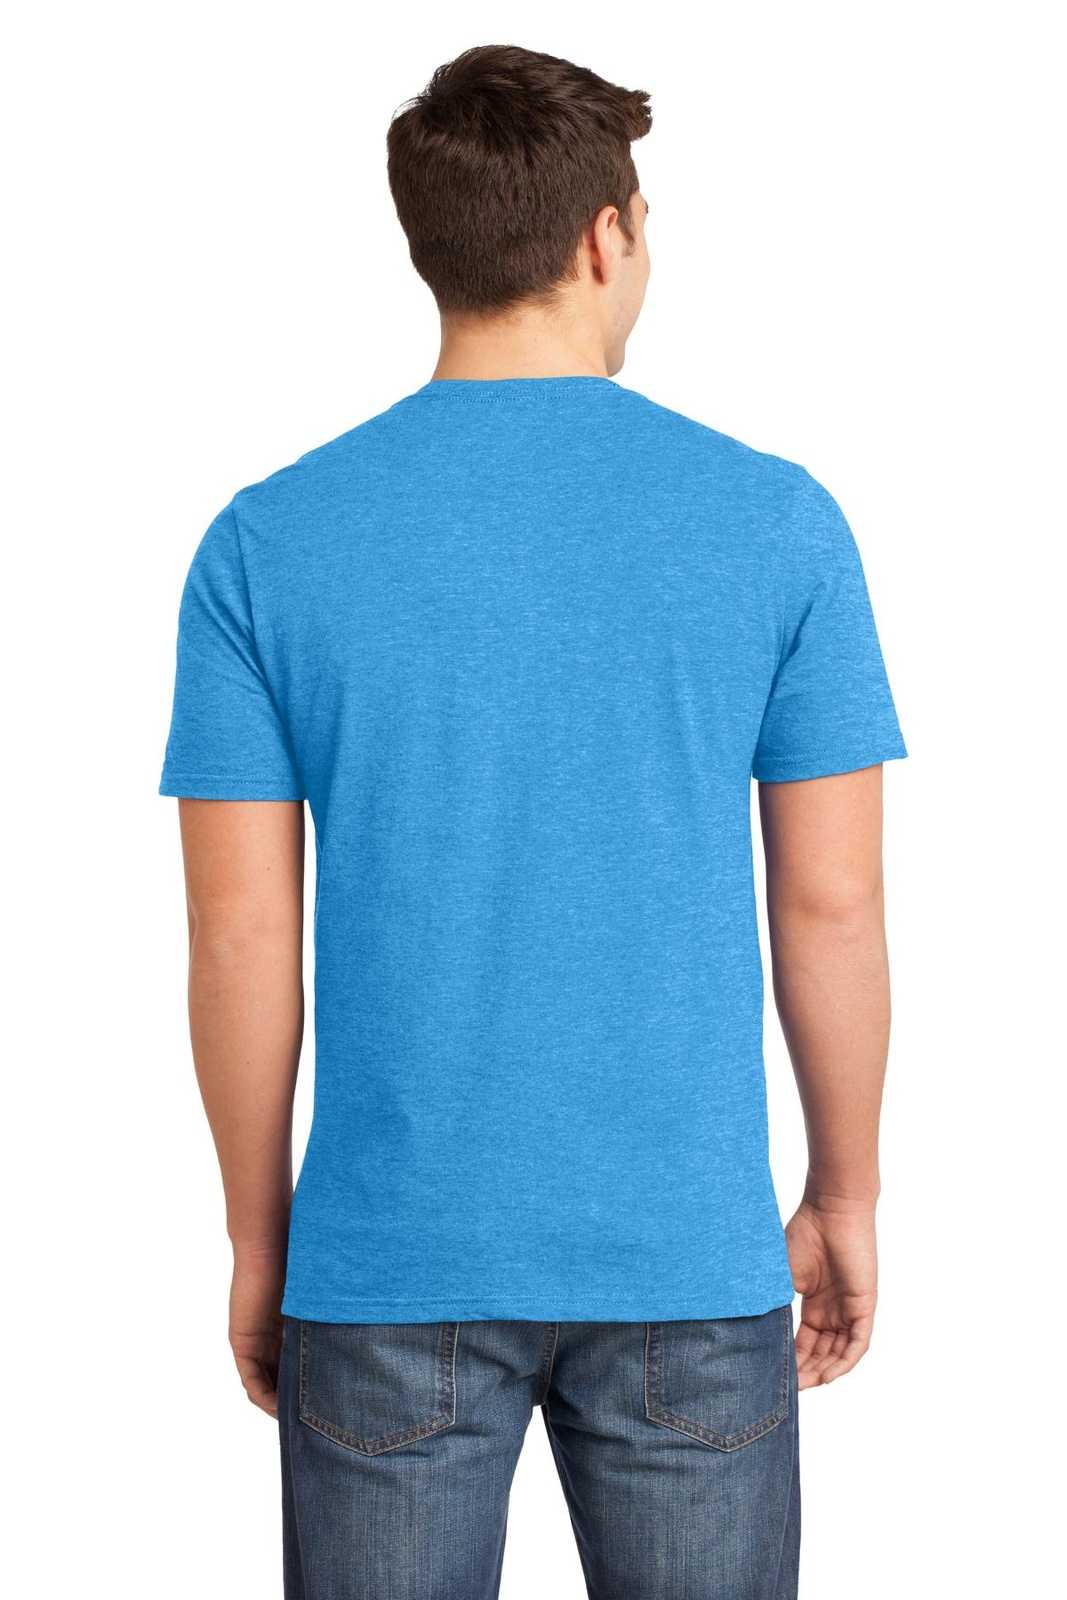 District DT6000 Very Important Tee - Heathered Bright Turquoise - HIT a Double - 2